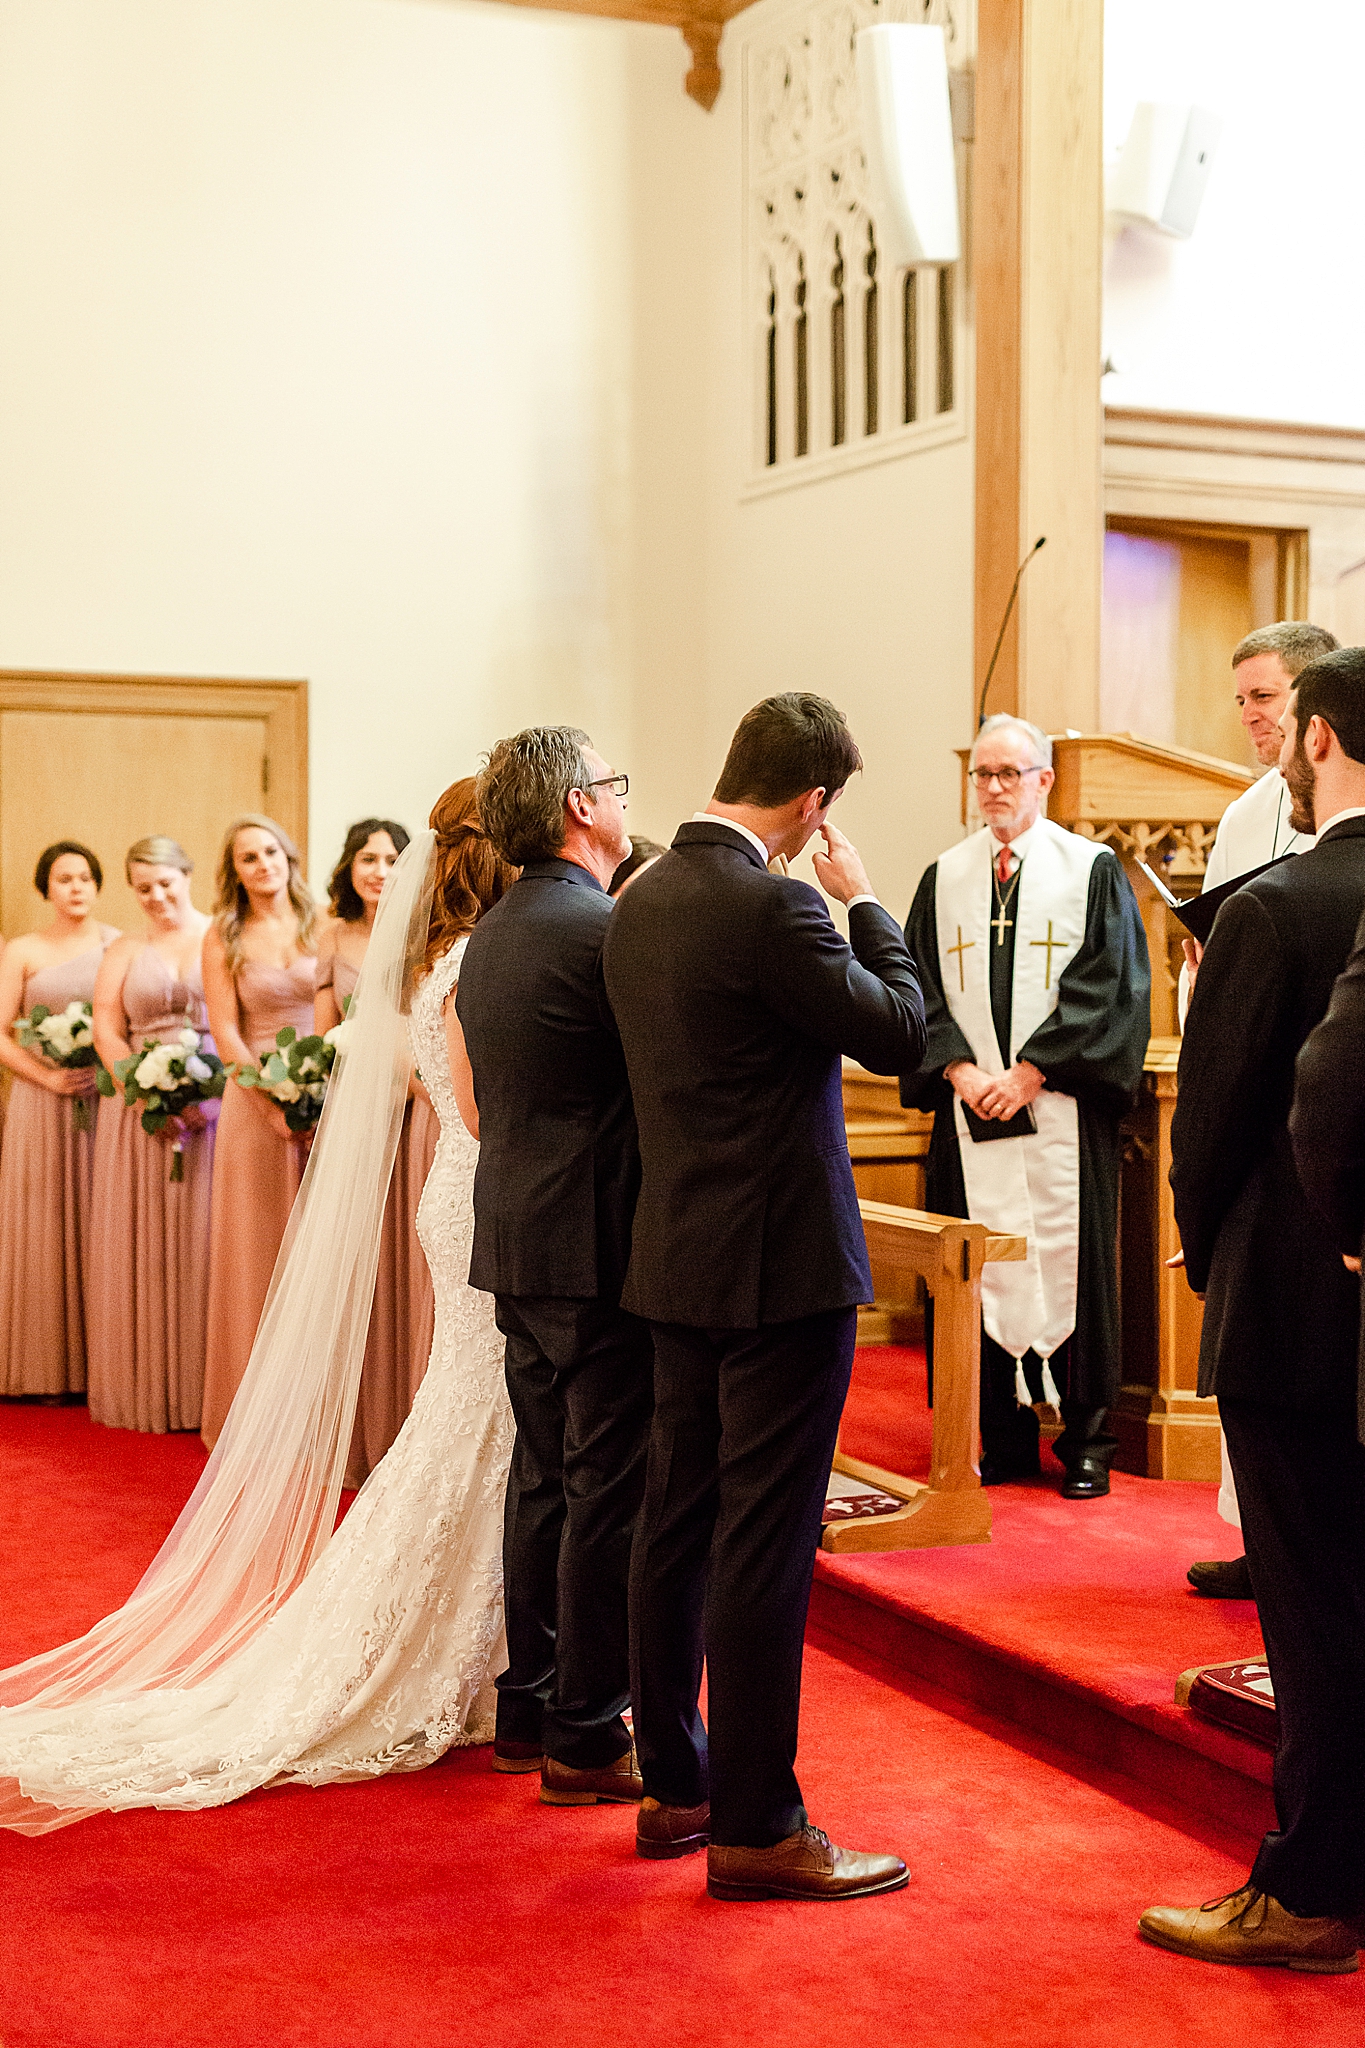 traditional classic Southern wedding ceremony in local church